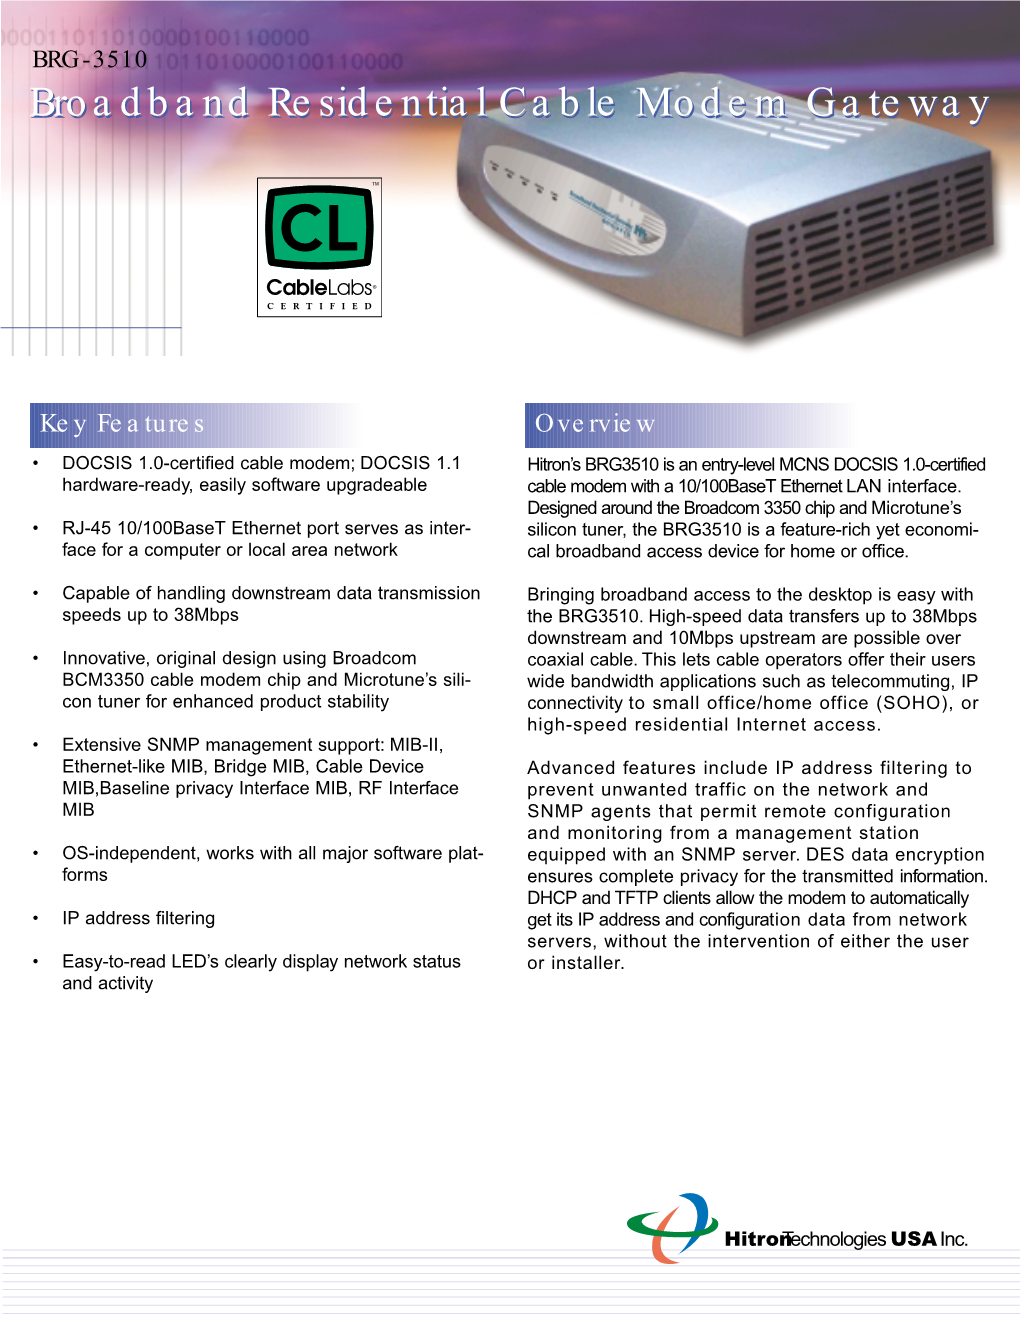 Broadband Residential Cable Modem Gateway